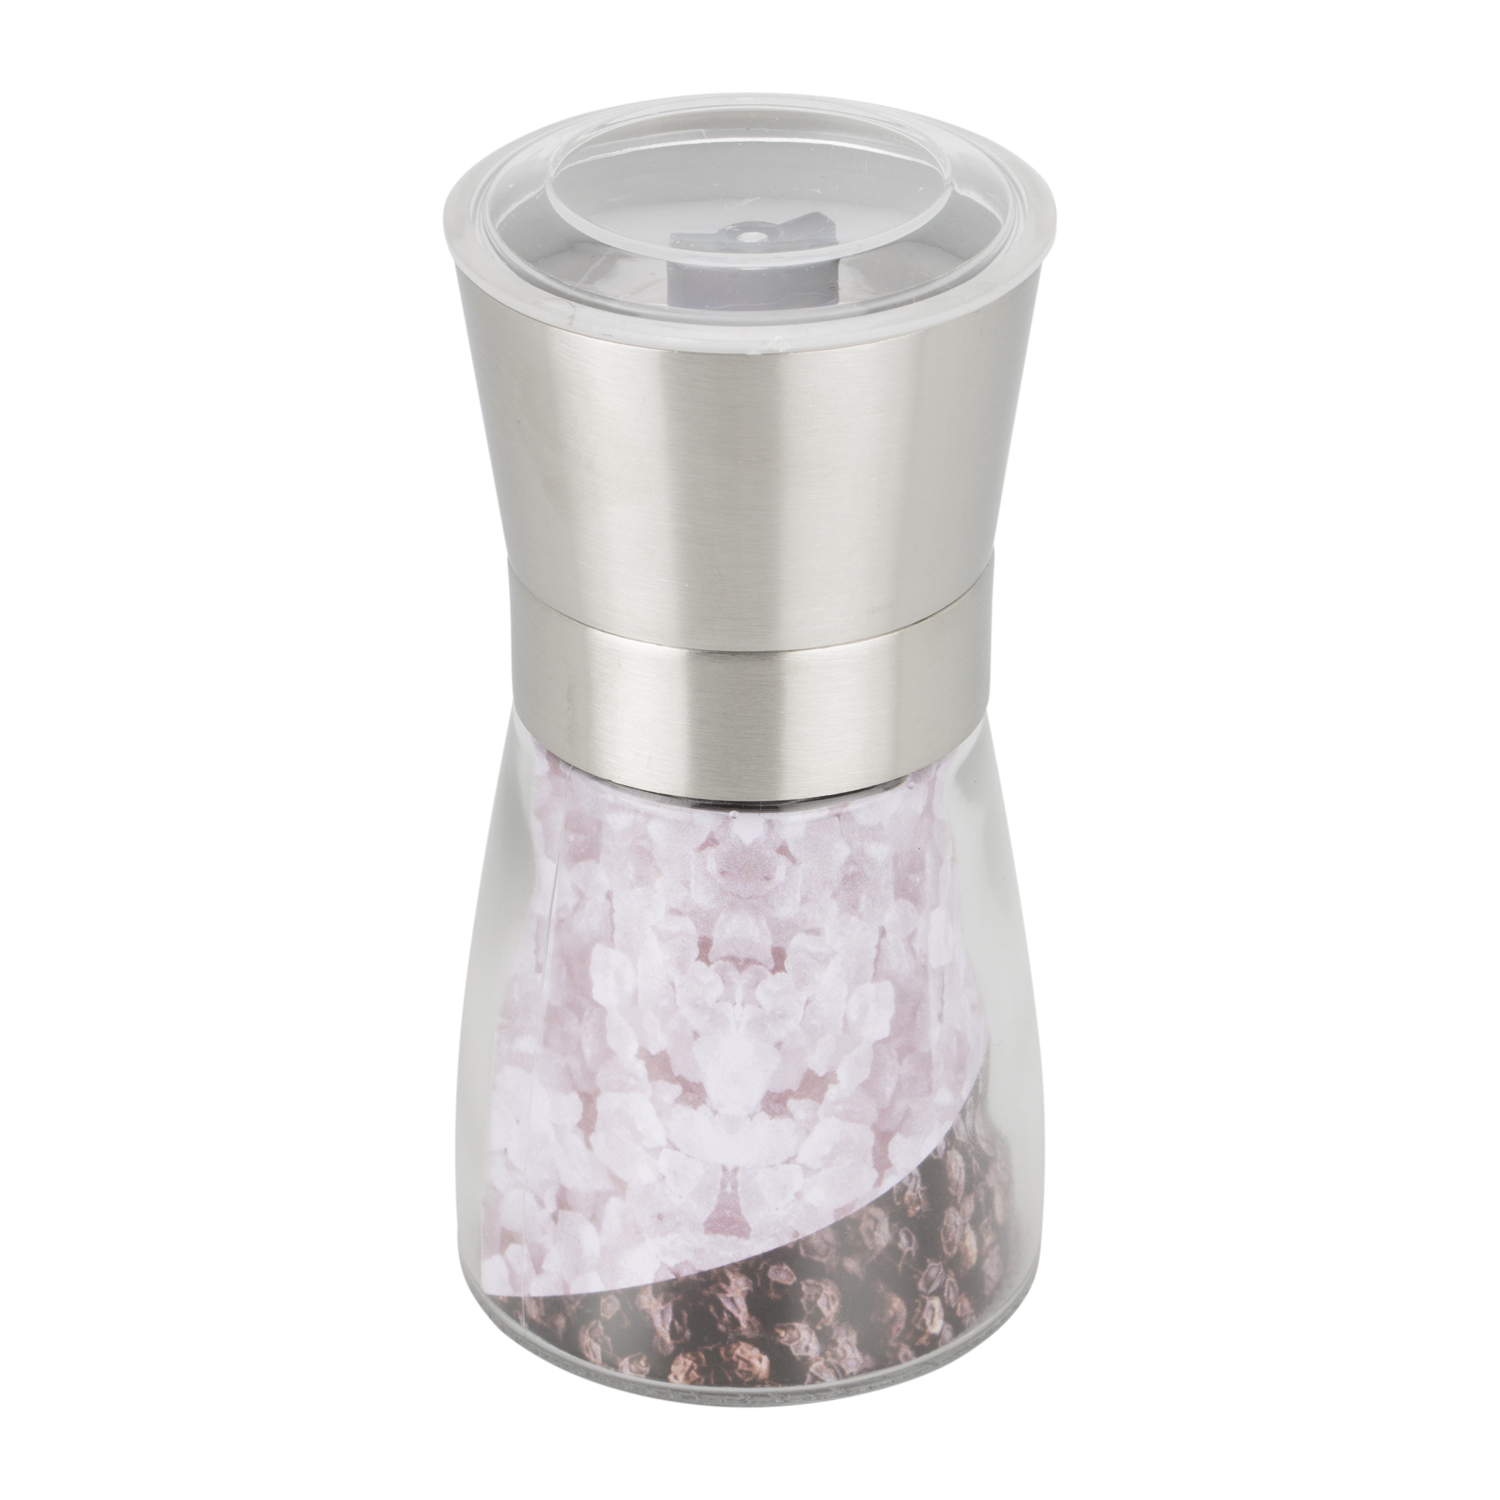 Cambridge Stainless Steel Salt and Pepper Mill Image 1